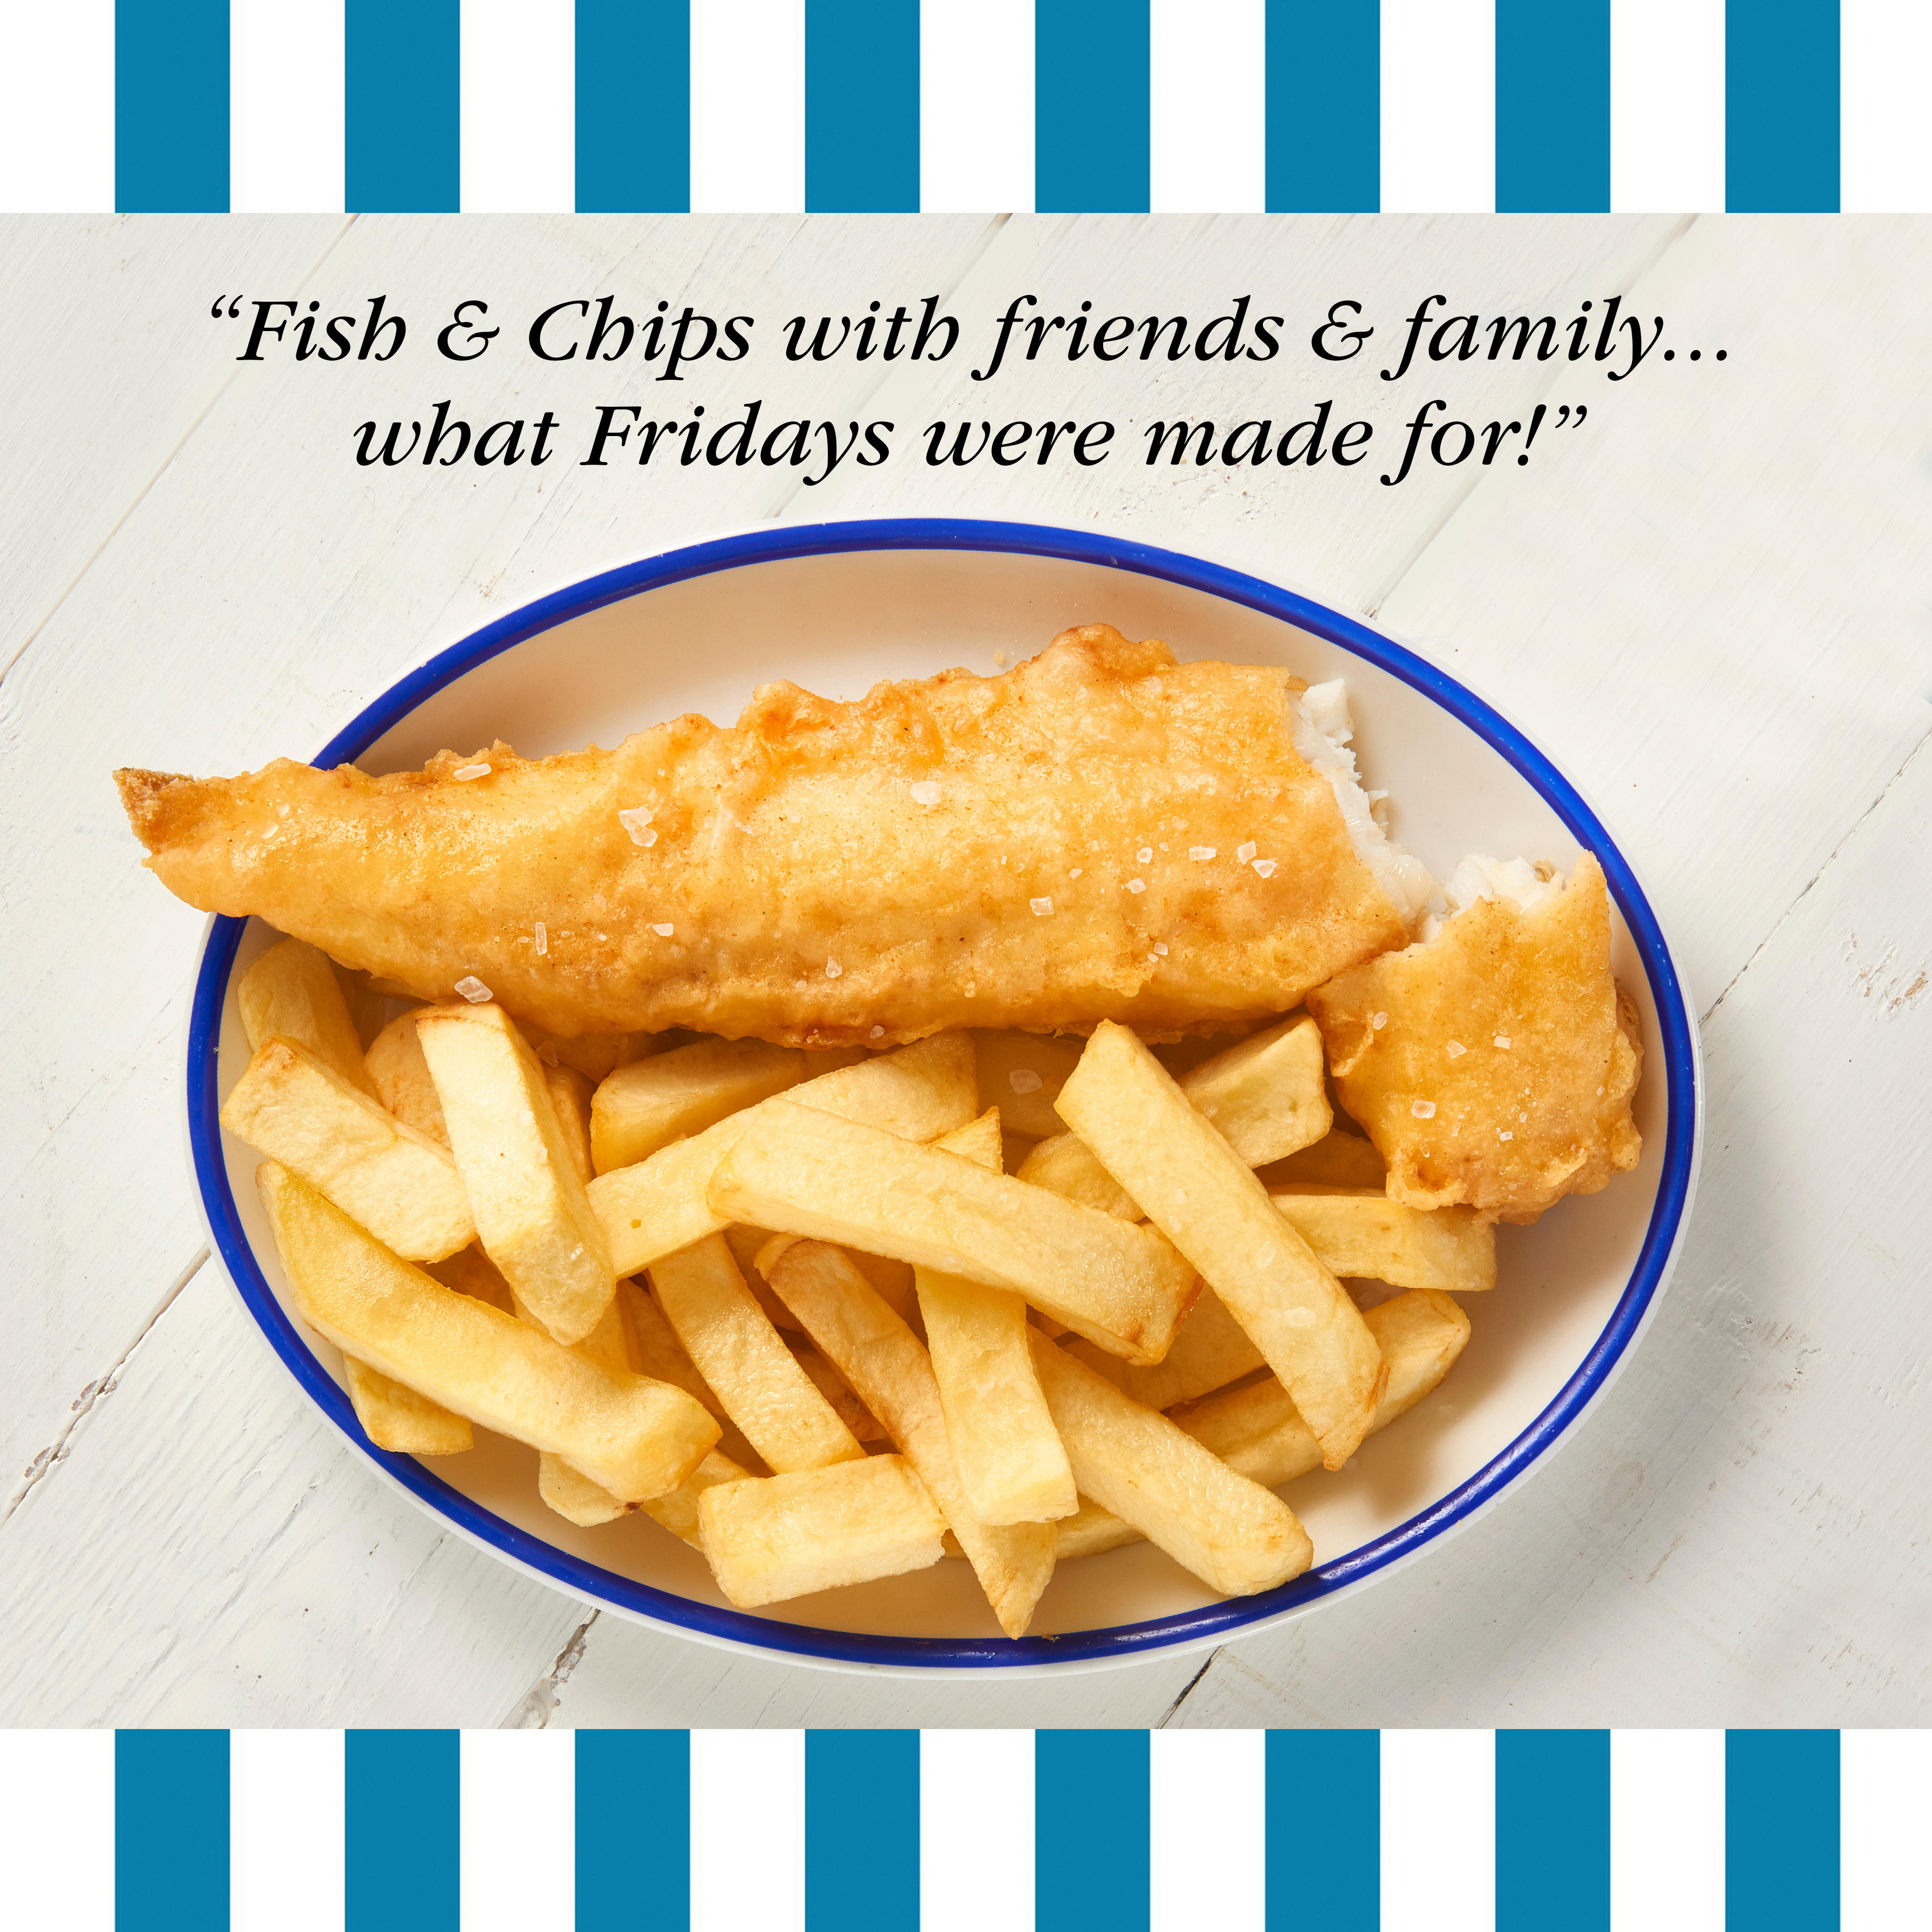 Images Churchill's Fish & Chips Collier Row